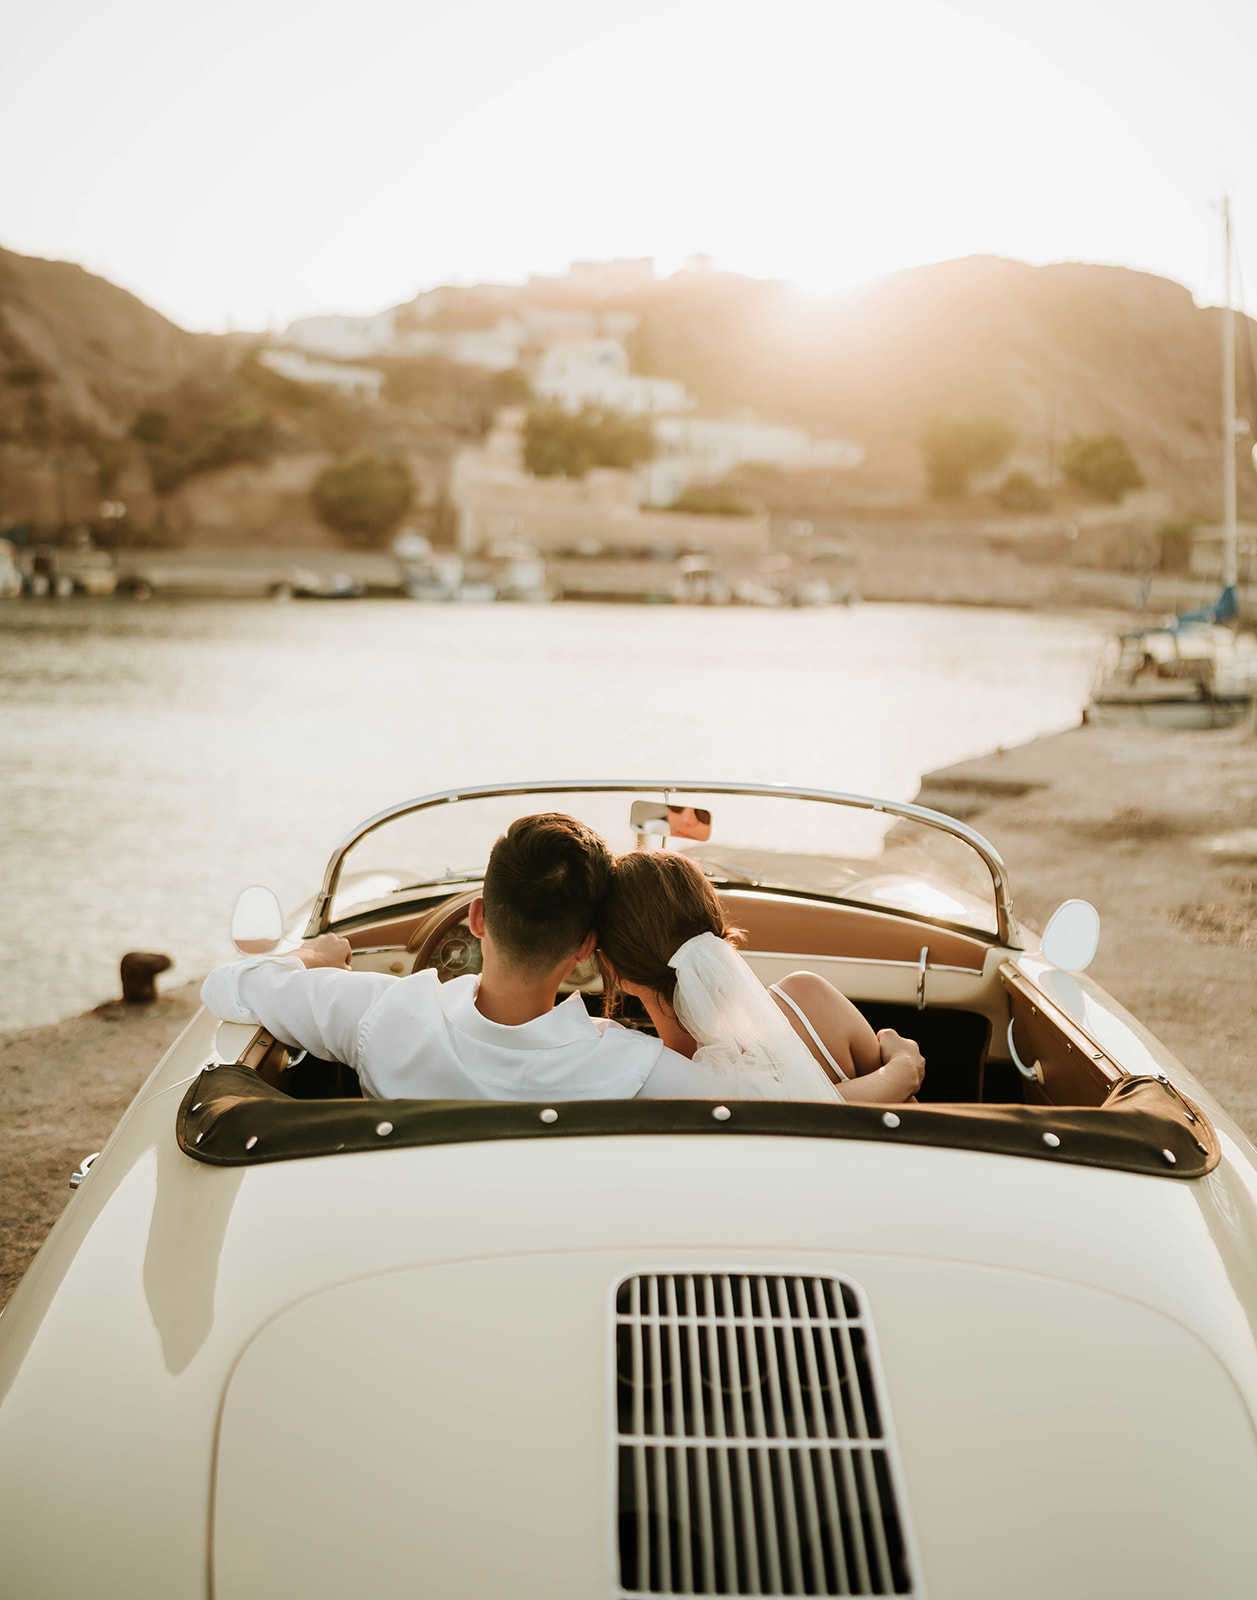 A couple who eloped in Santorini enjoyed the sunset in a vintage car